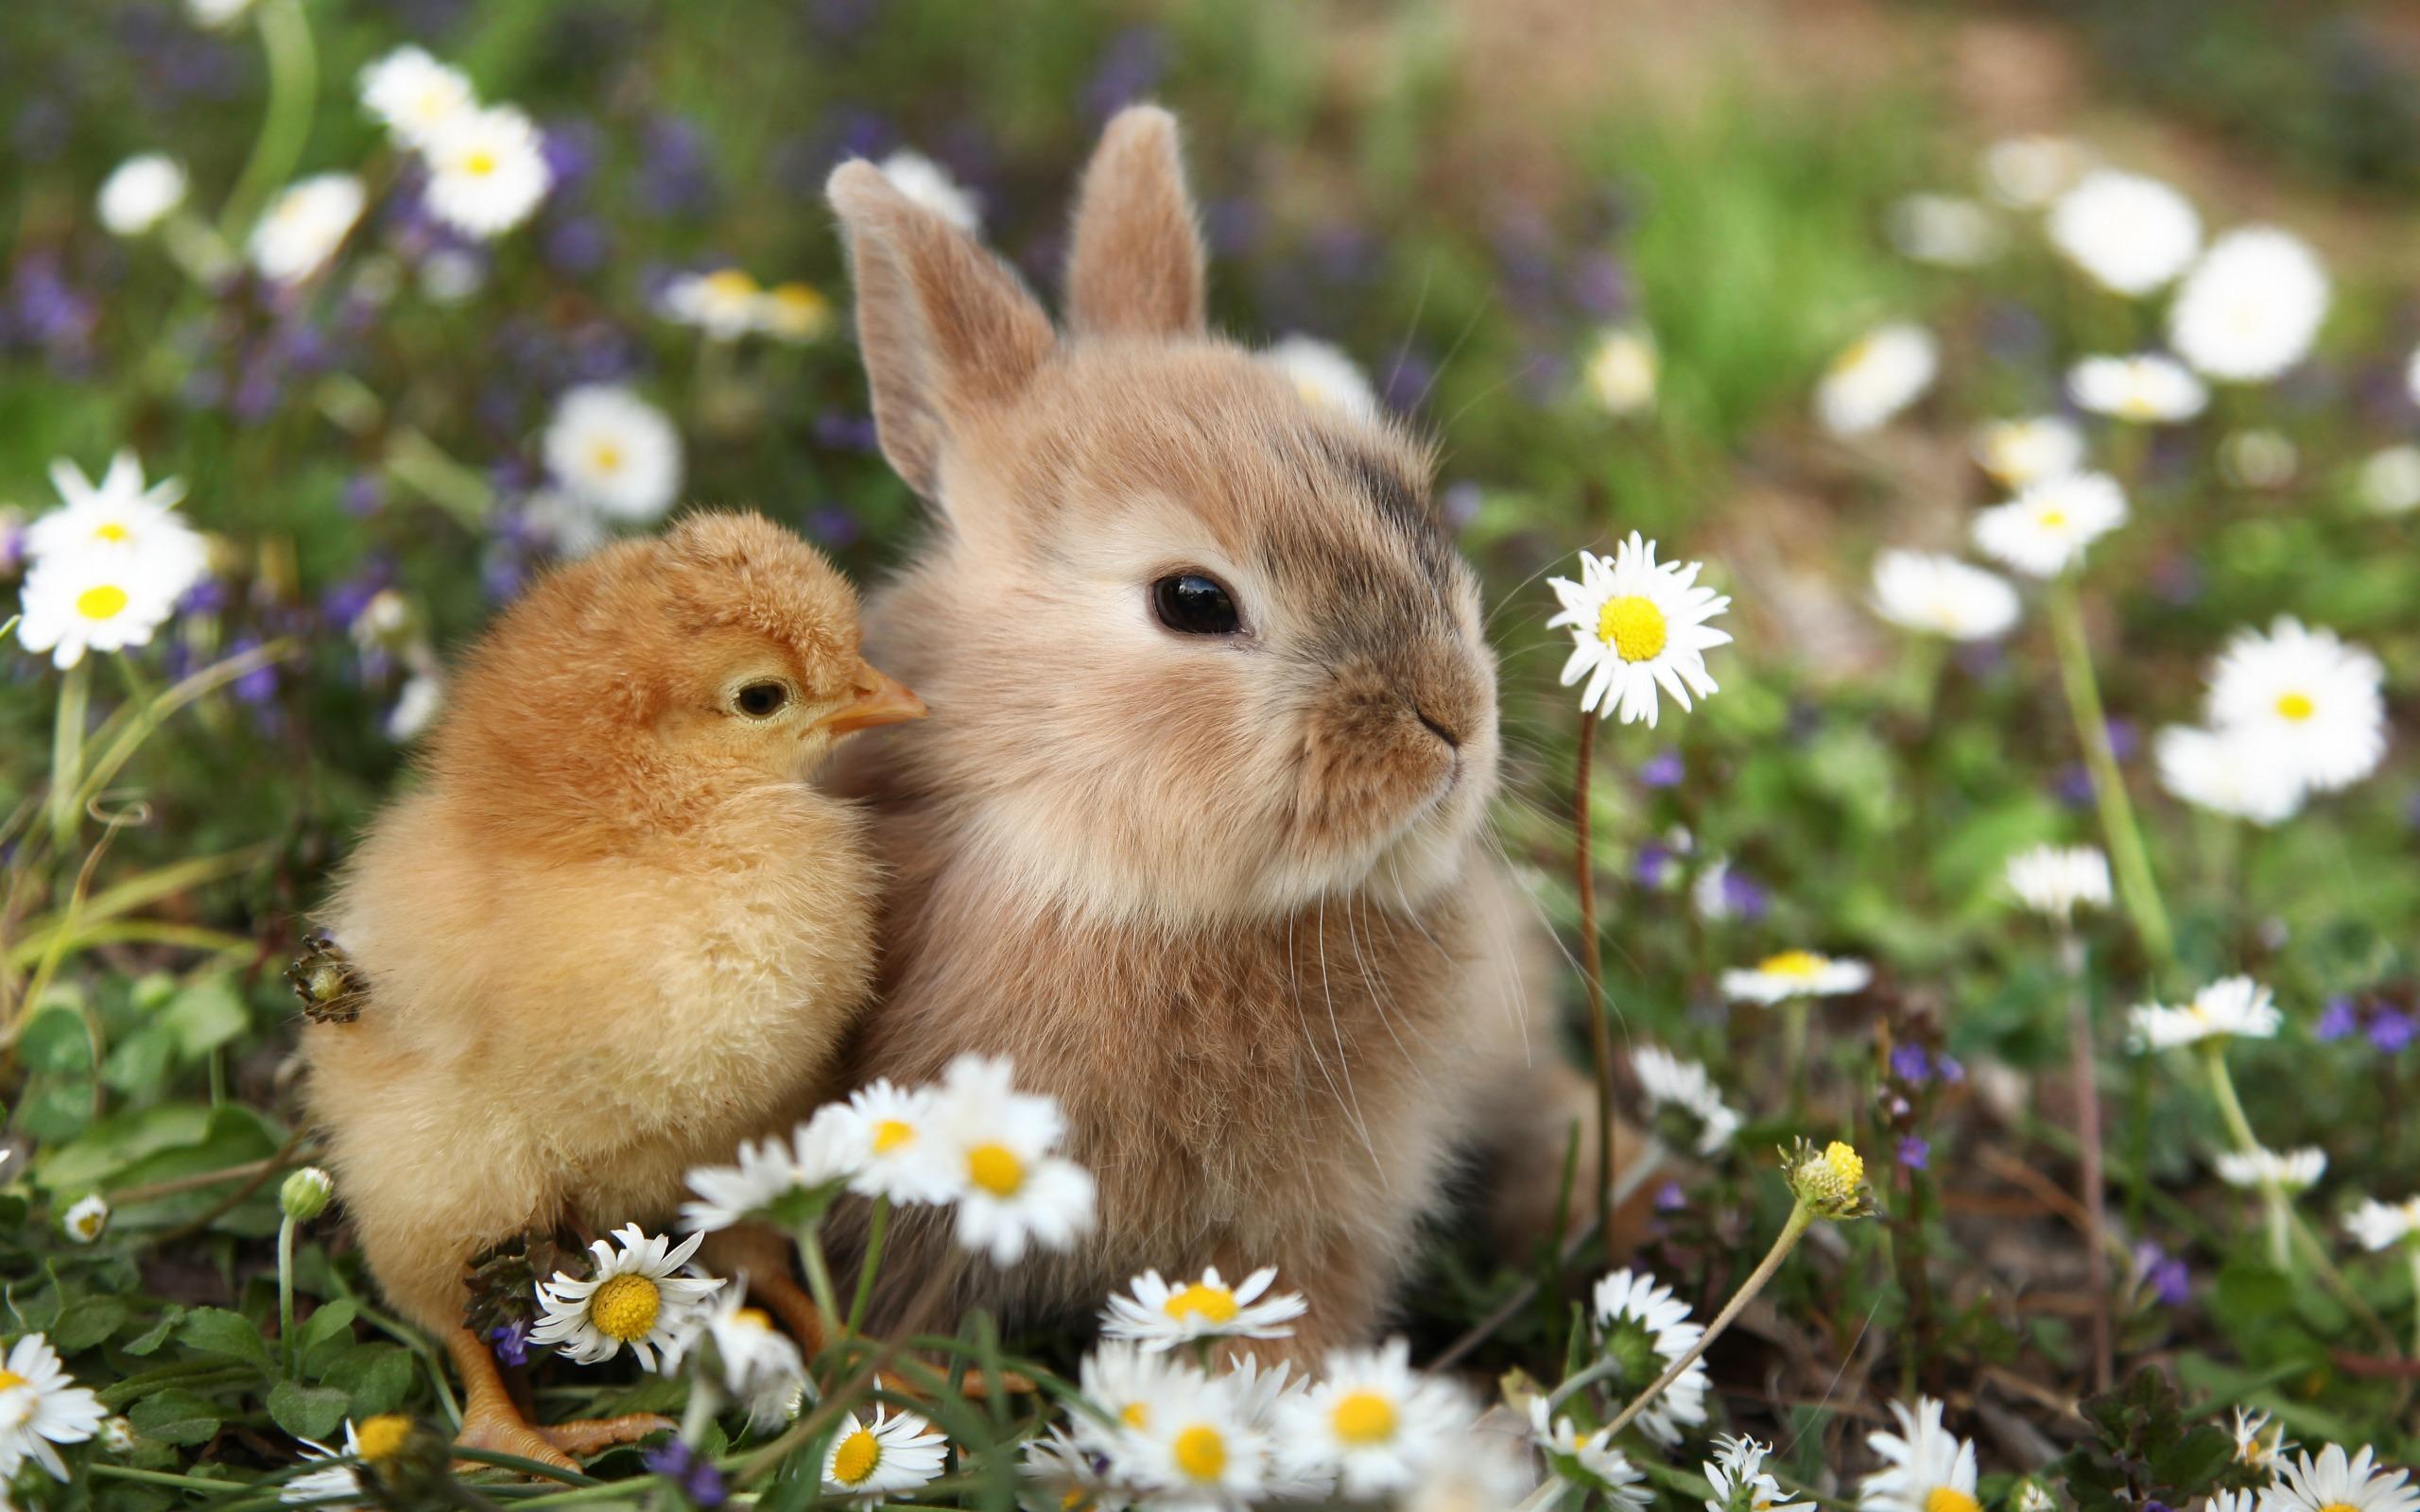 Download wallpapers cute animals, rabbit, little chick